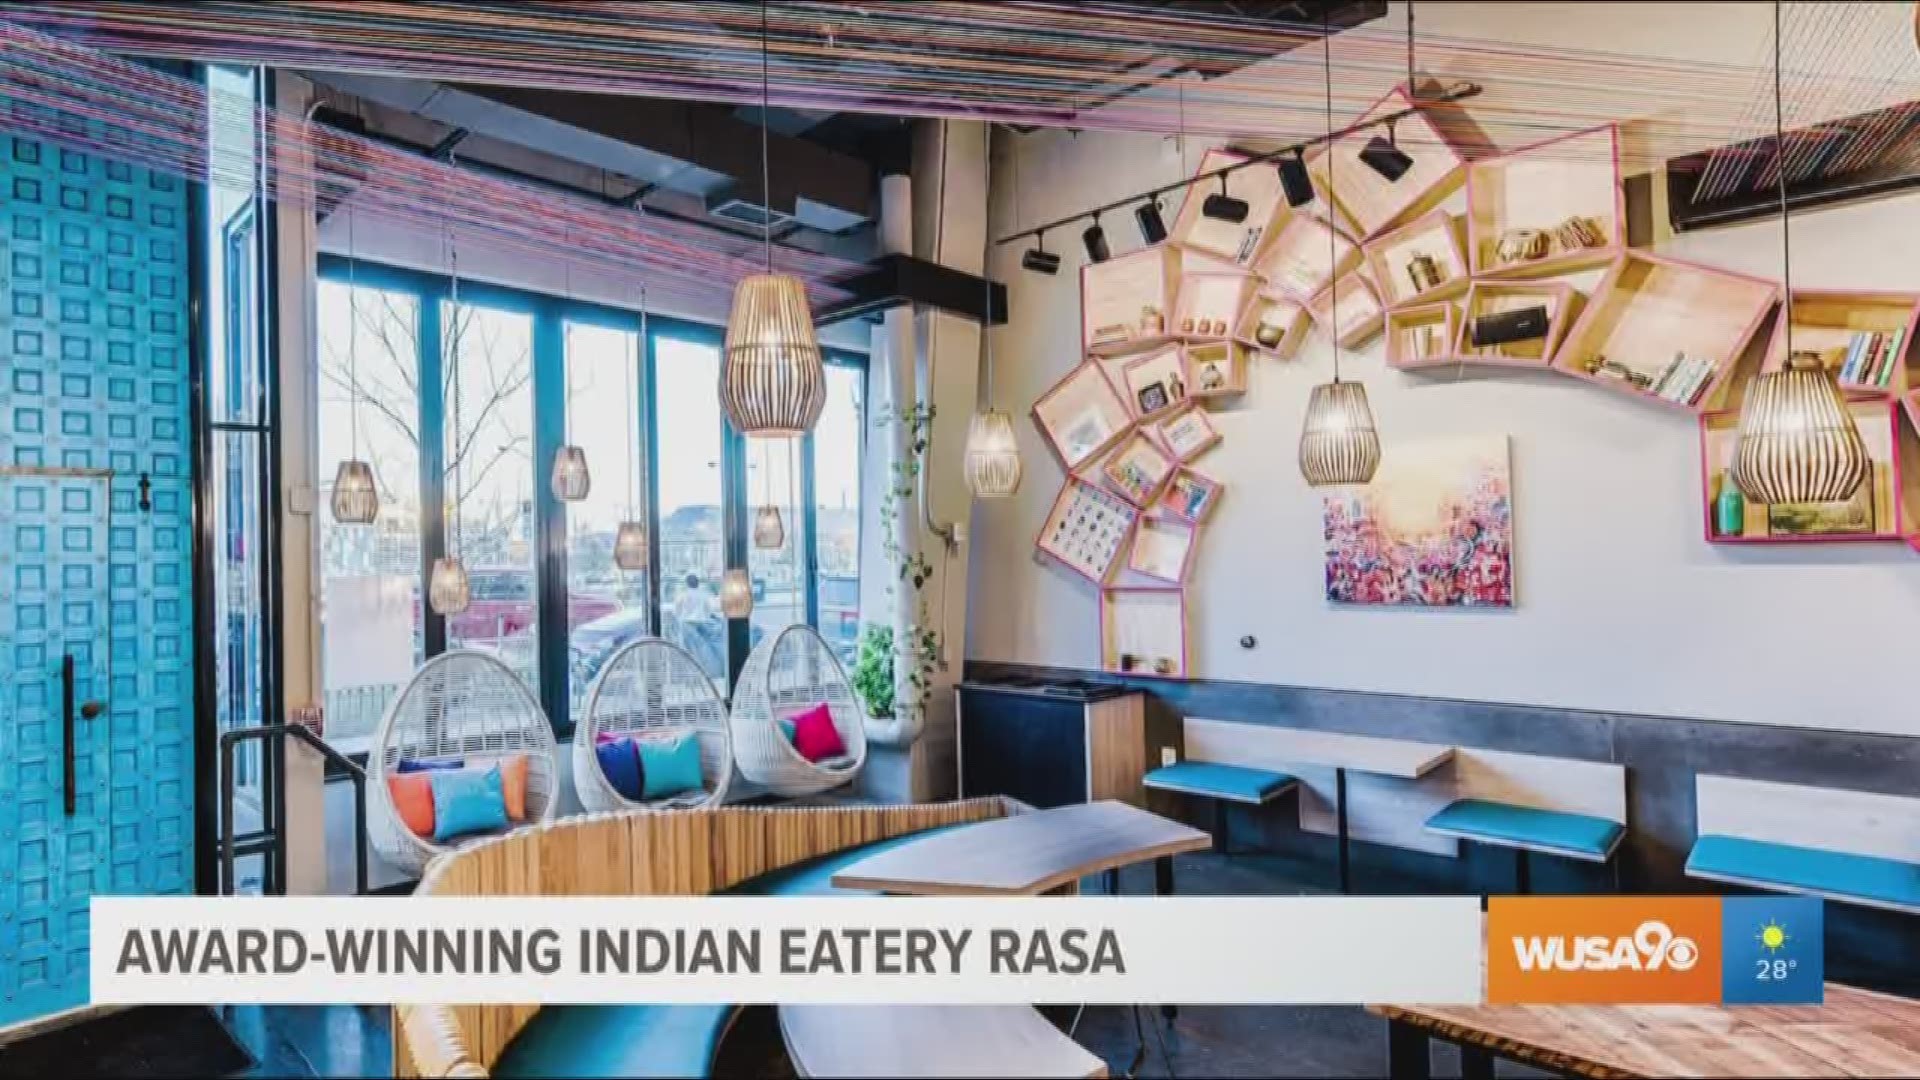 Award winning restaurant Rasa in Navy Yard, which opened in 2017, is opening 2 new locations. They will be opening in Crystal City and Mount Vernon in 2020.